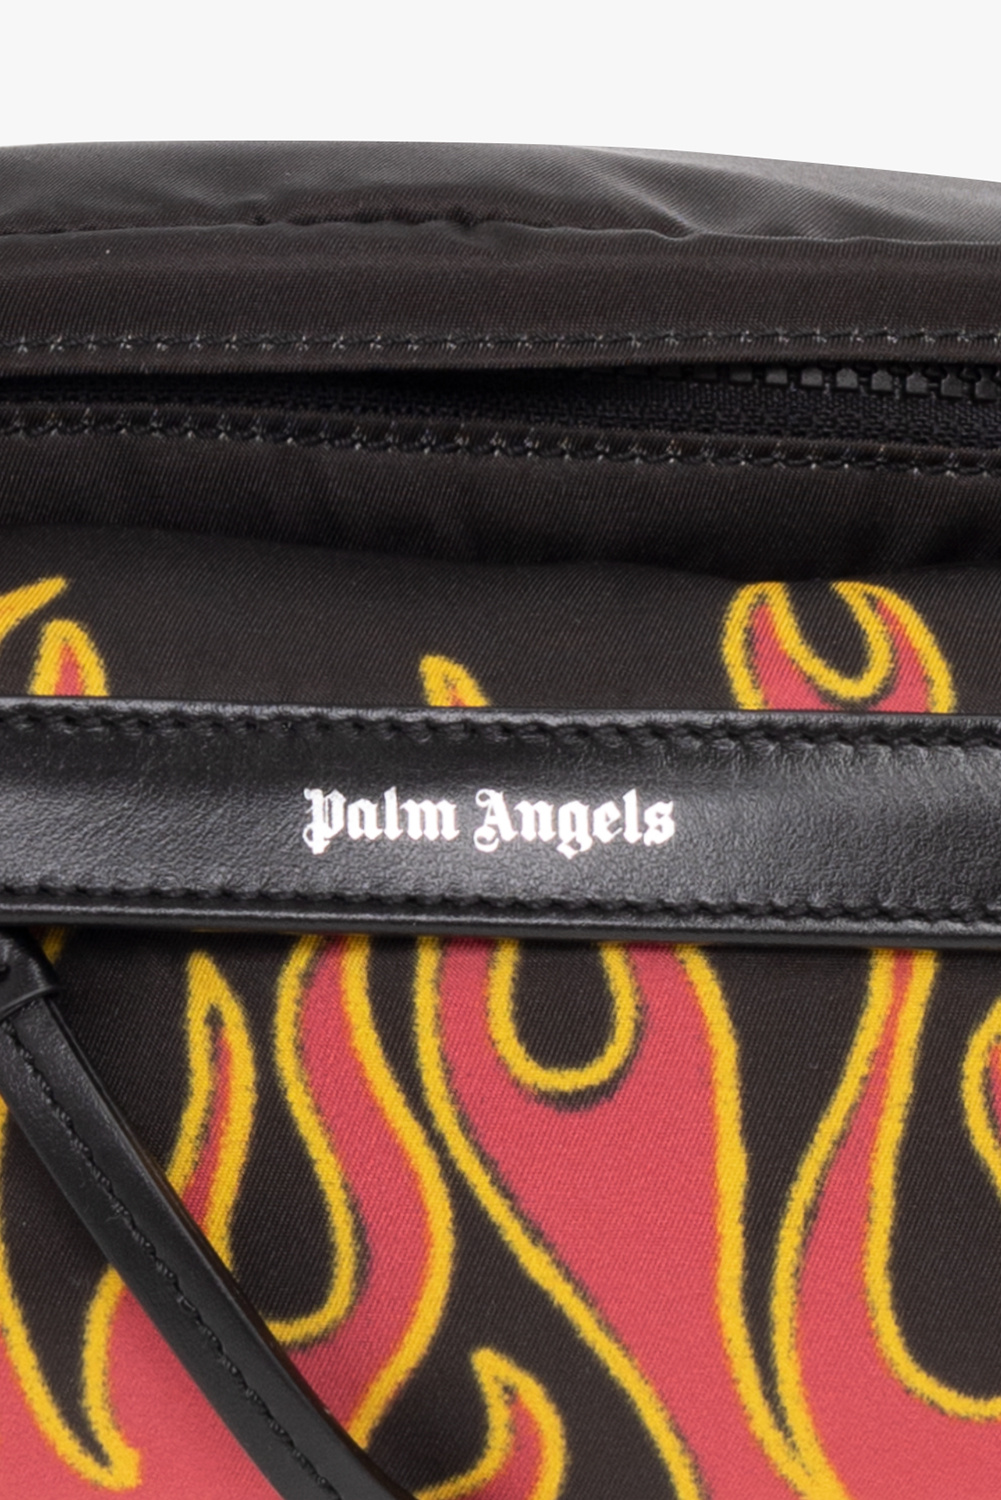 Palm Angels Cant decide how you want to wear your bag